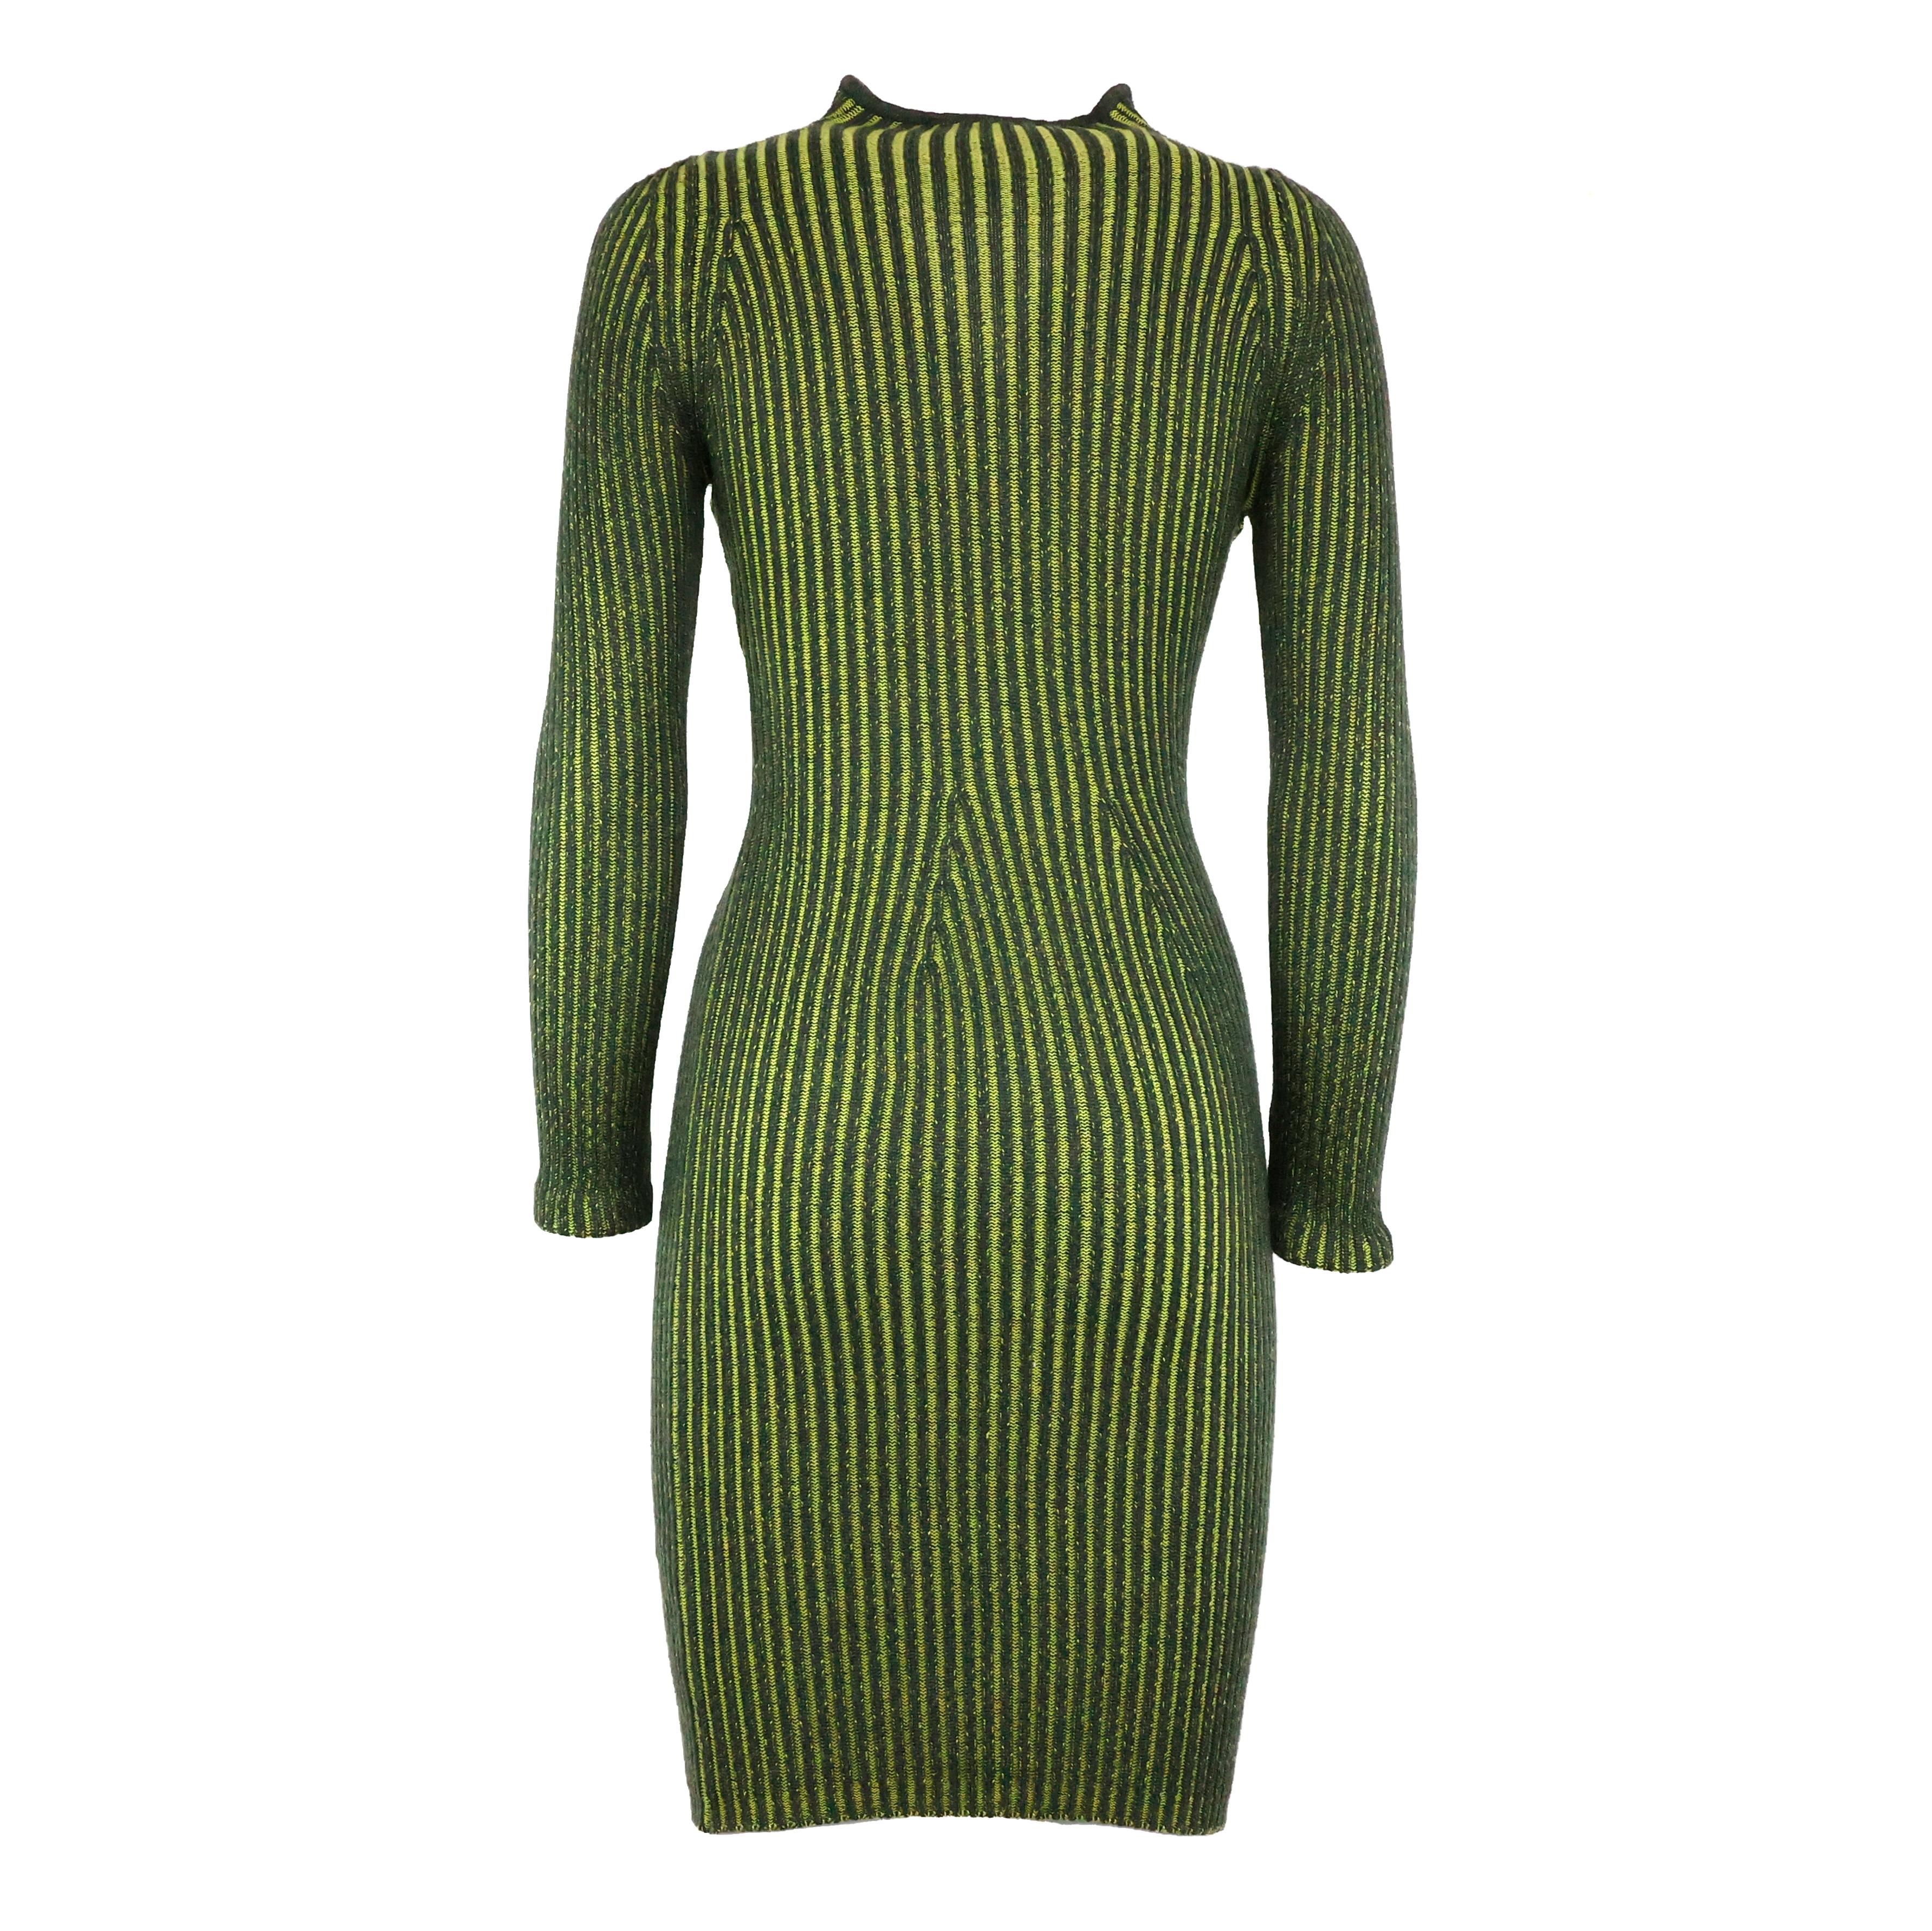 MUGLER dress in wool color green, size M.

Condition:
Excellent.